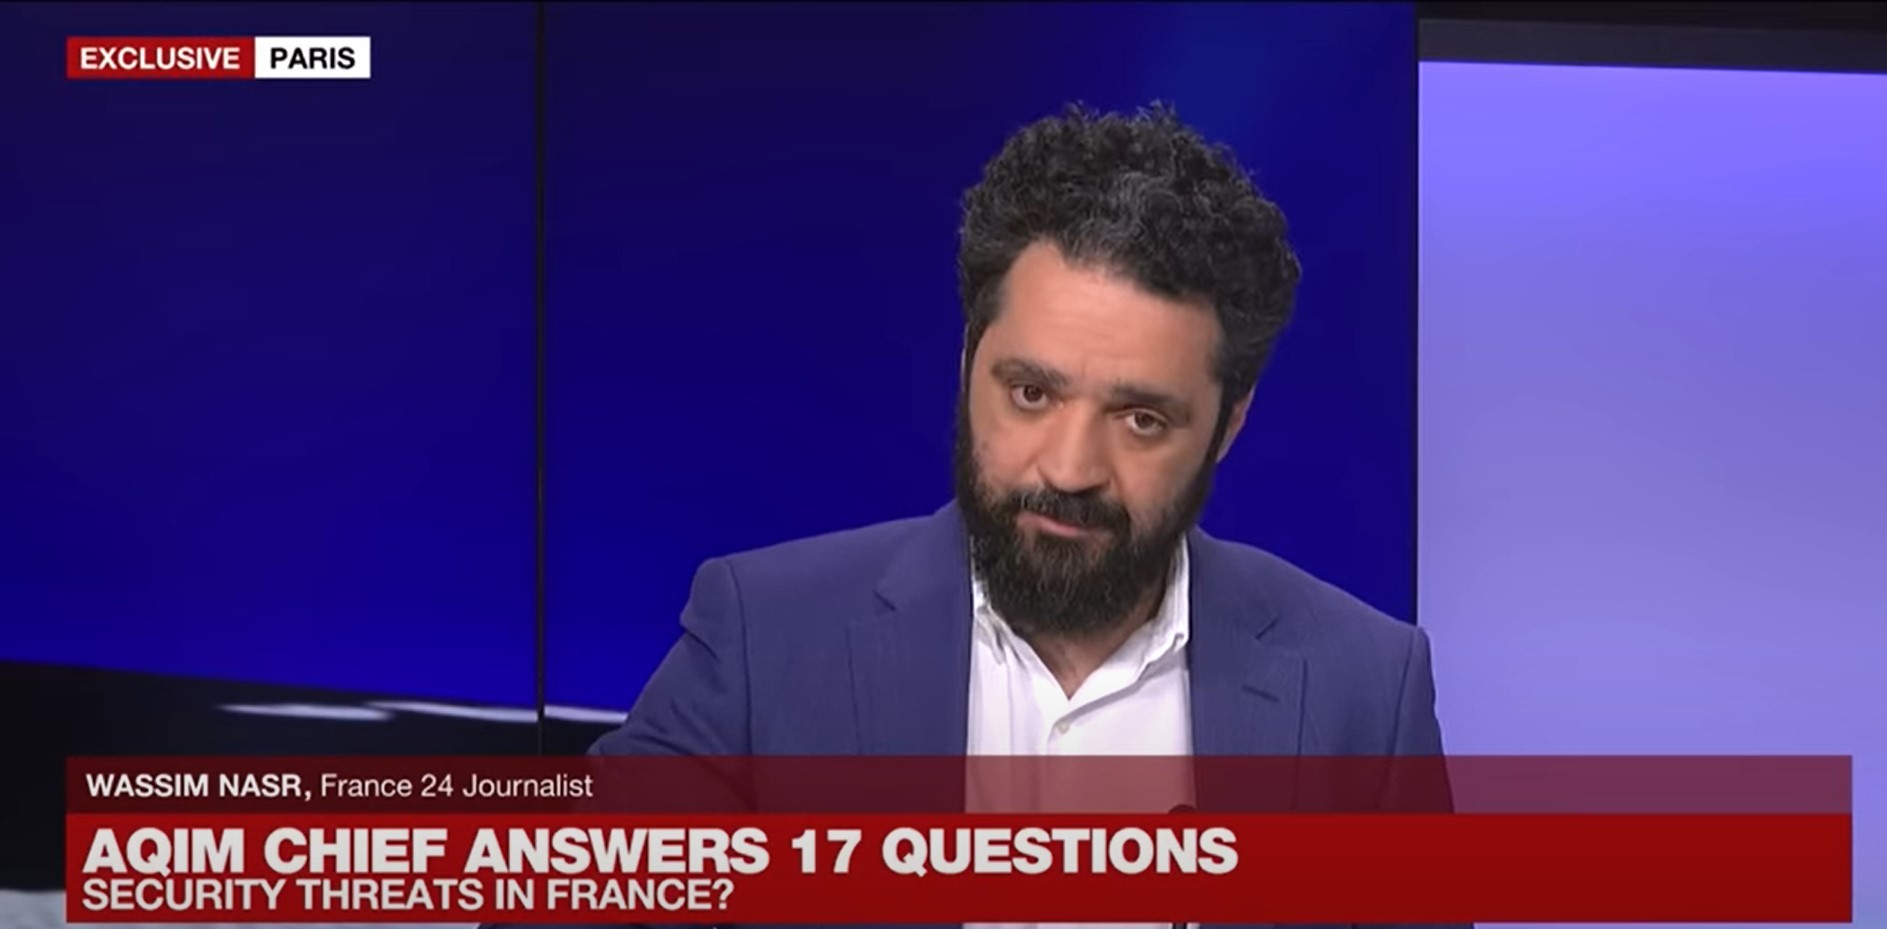 Interview of the leader of Al-Qaeda with France 24: Has the French press become the spokesperson for terrorism?